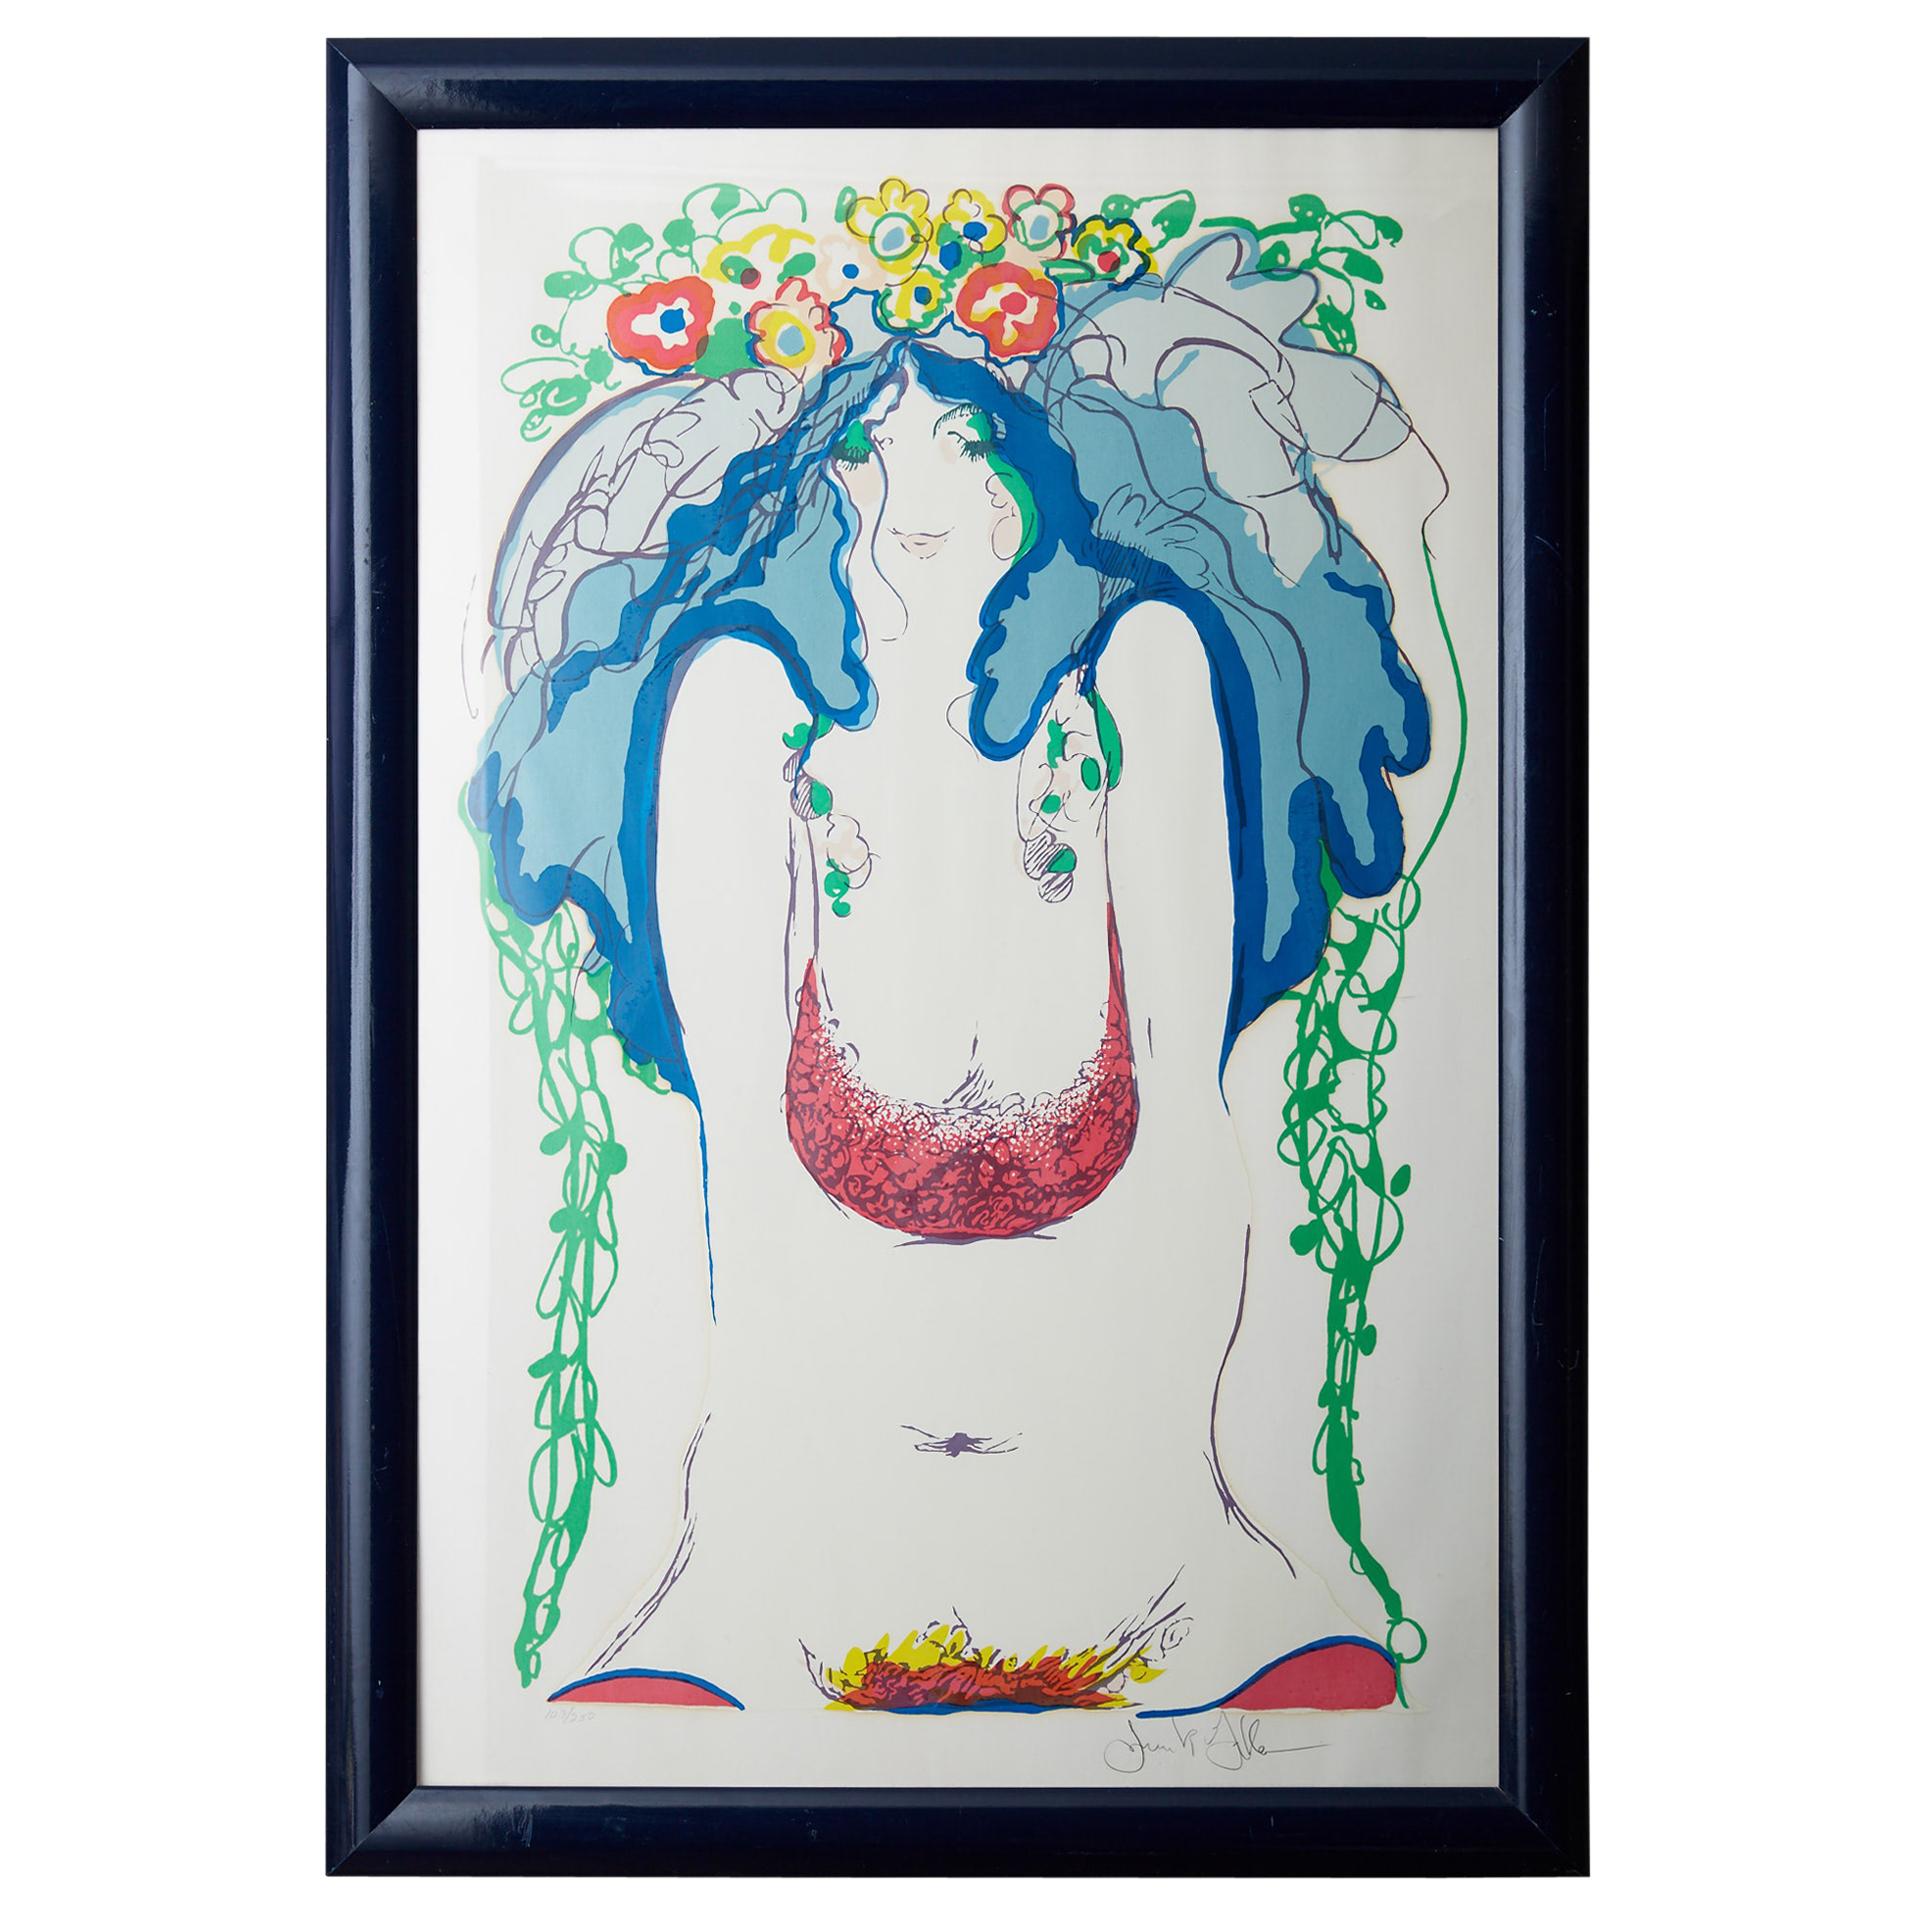 "Flowers in Her Hair, " Frank Gallo Signed Serigraph